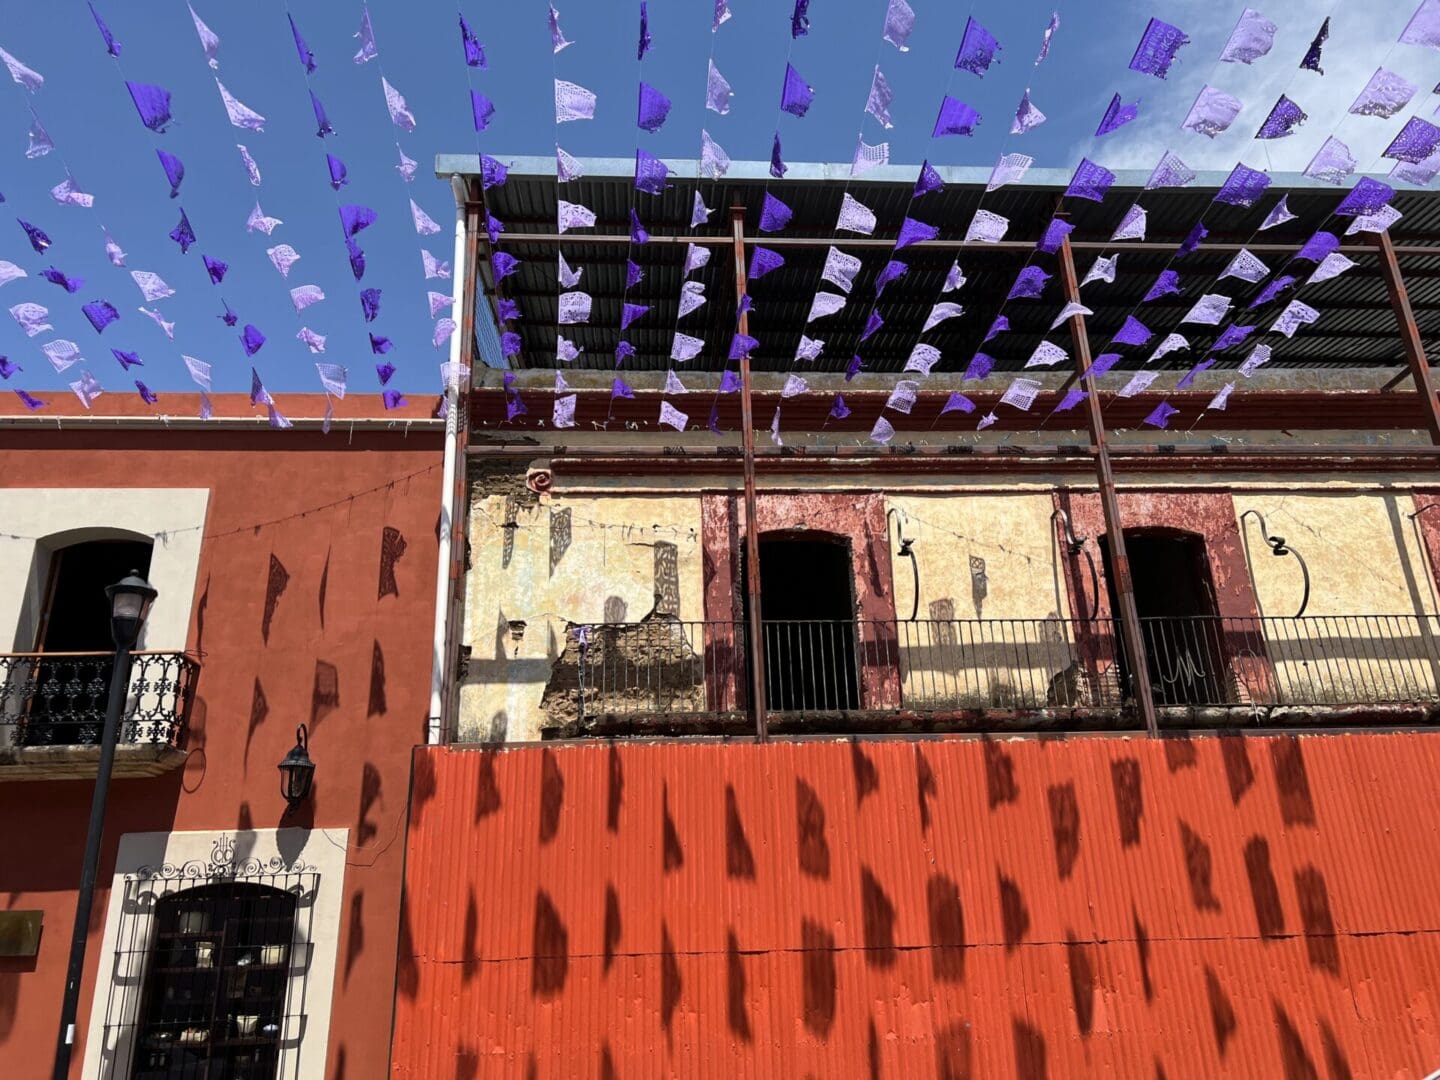 Purple kites hanging from a building in guadalajara, mexico.